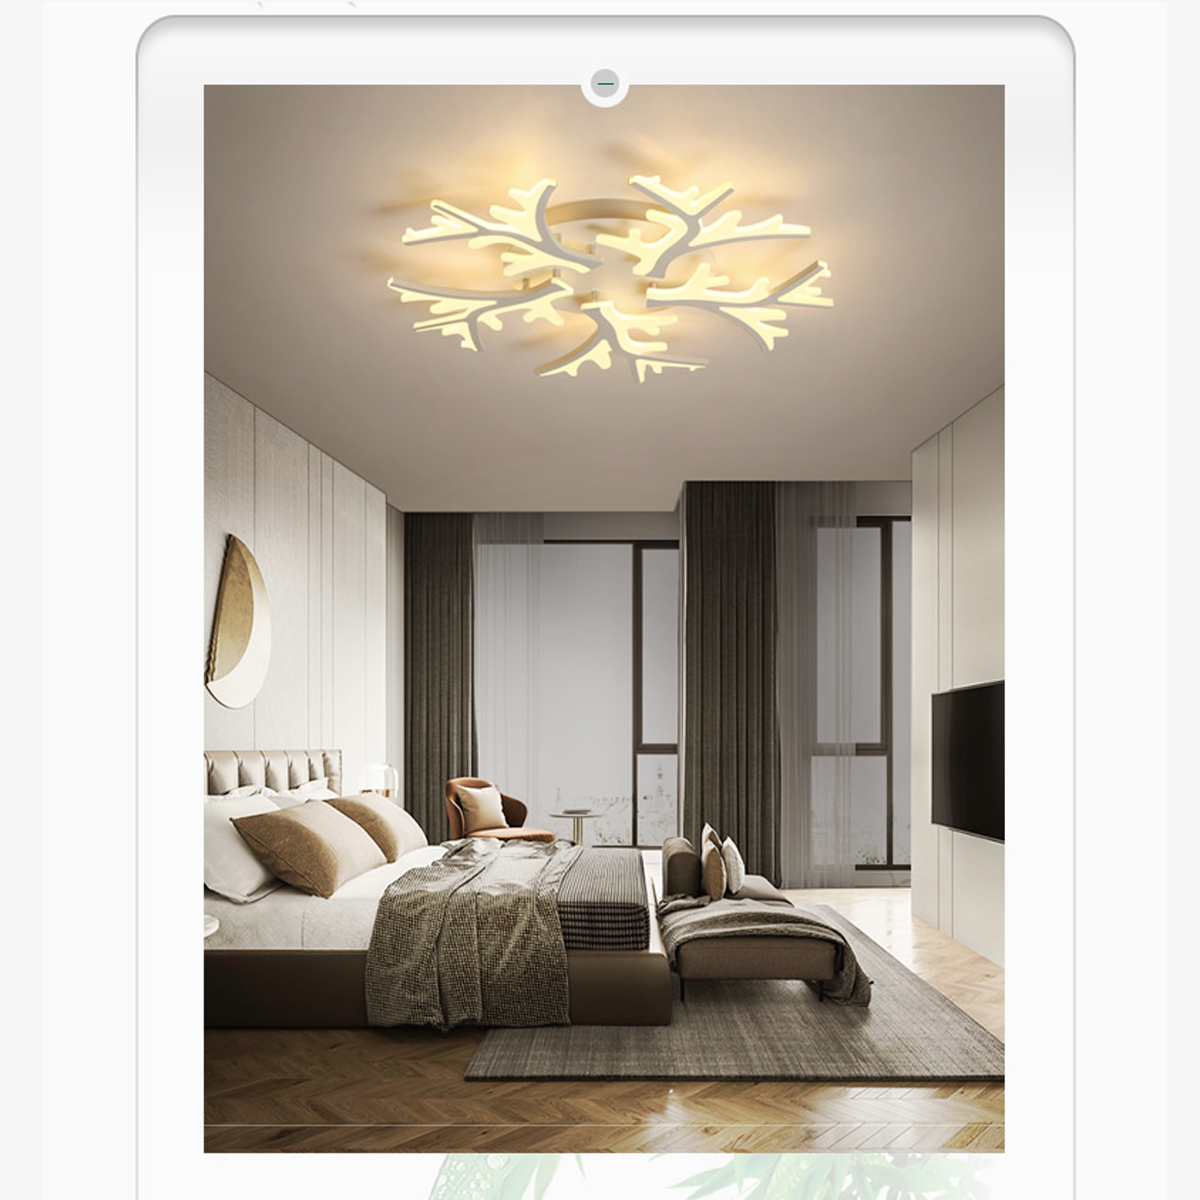 LED-Ceiling-Light-Pendant-Lamp-Hallway-Bedroom-Dimmable-Remote-Fixture-Decor-1795825-4